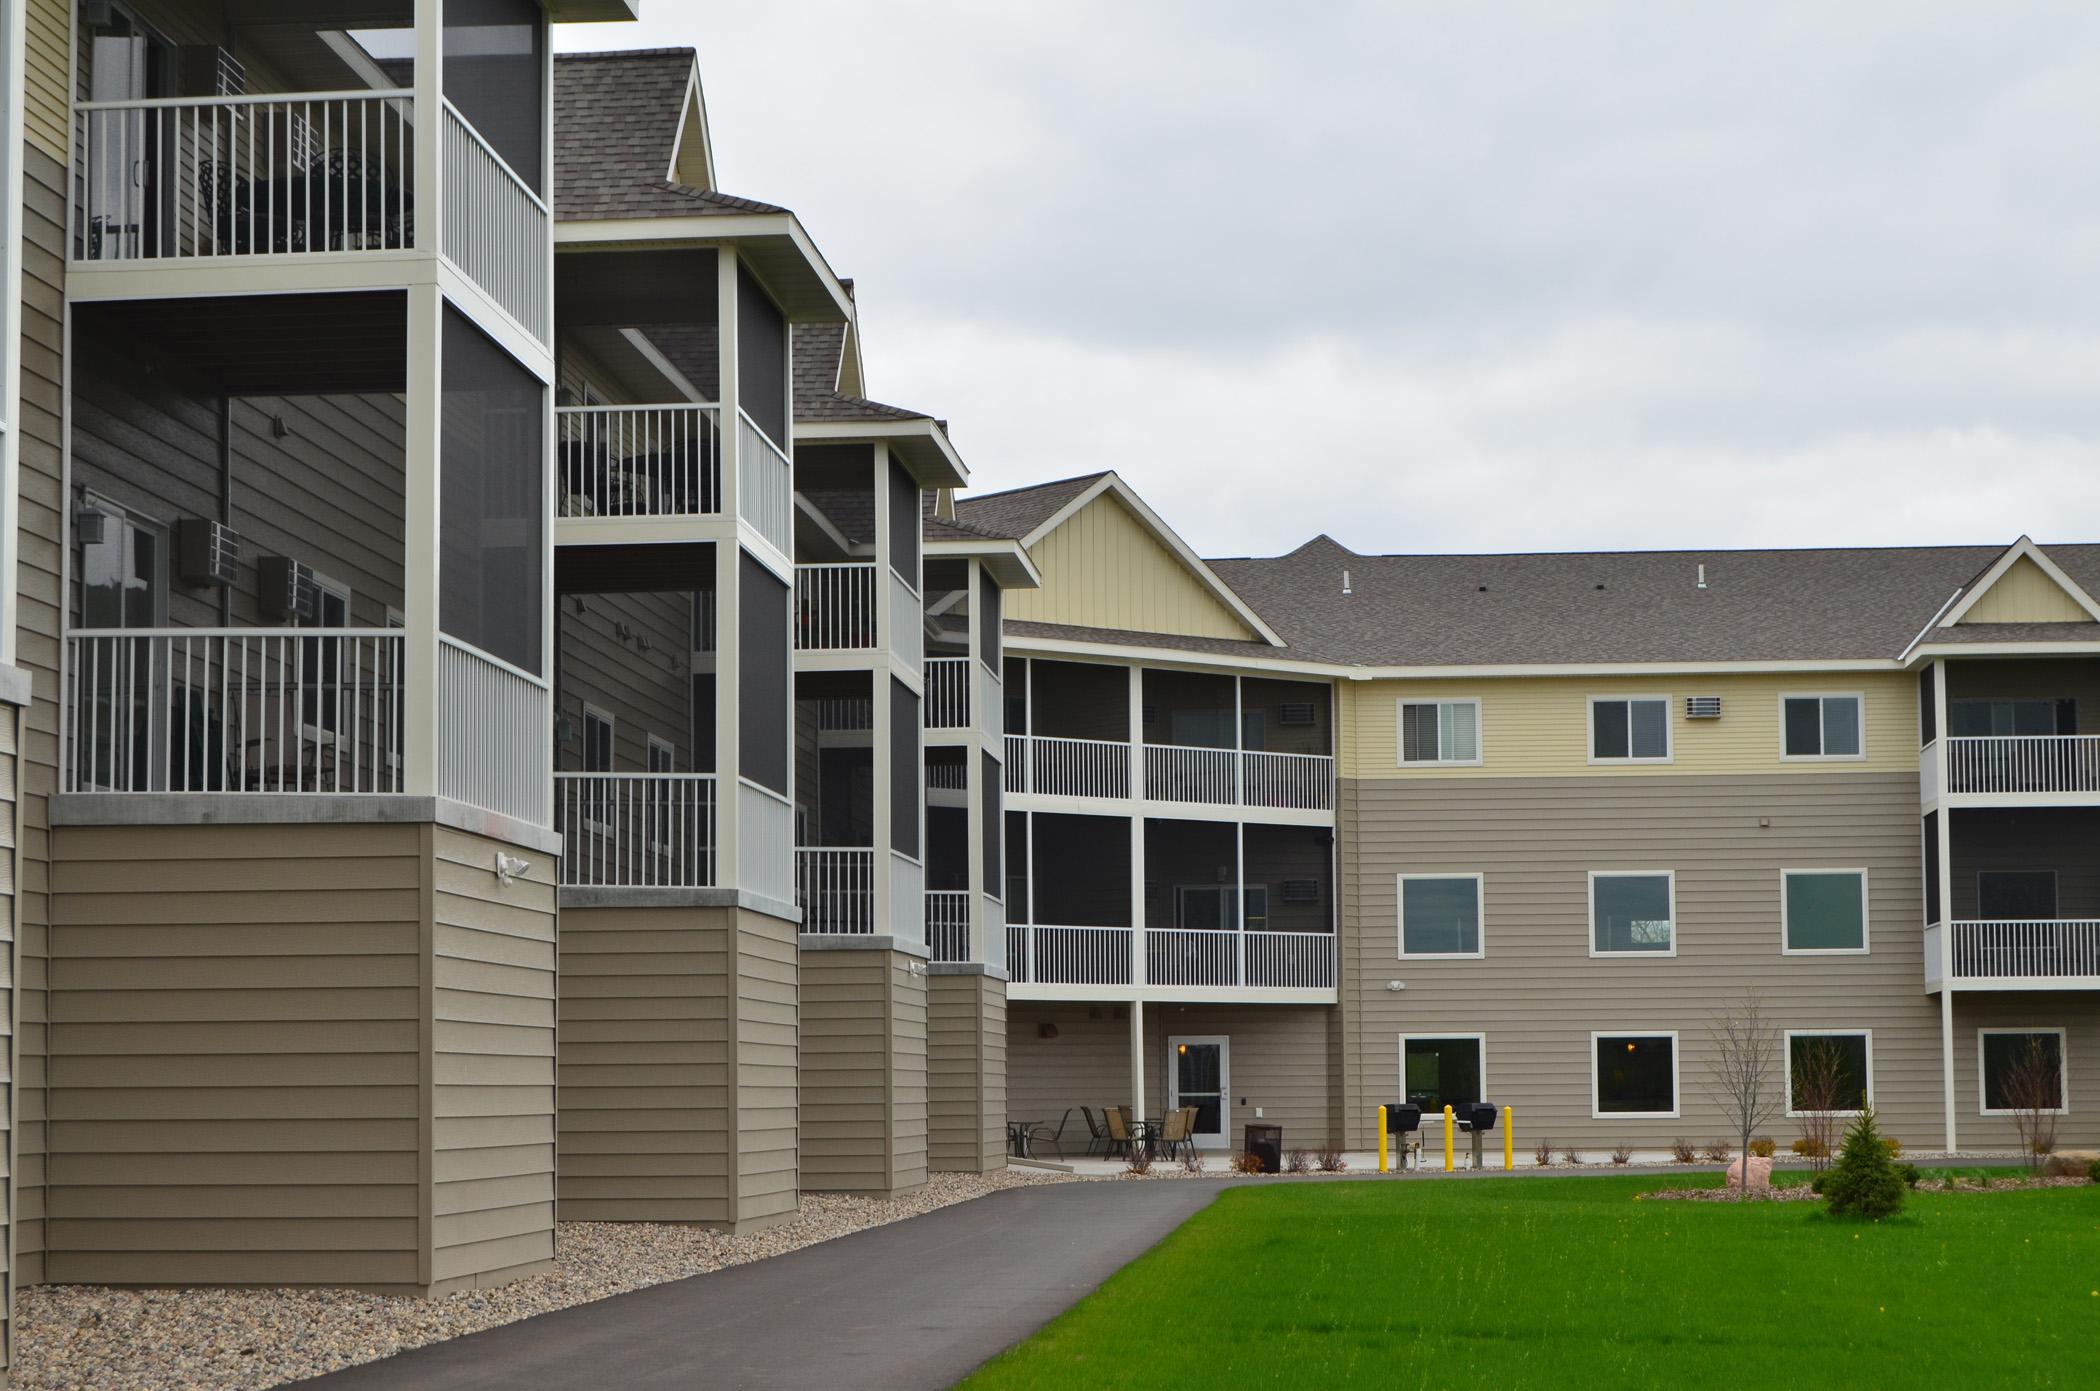 EDCO's traditional lap siding on apartment complex in Minnesota.